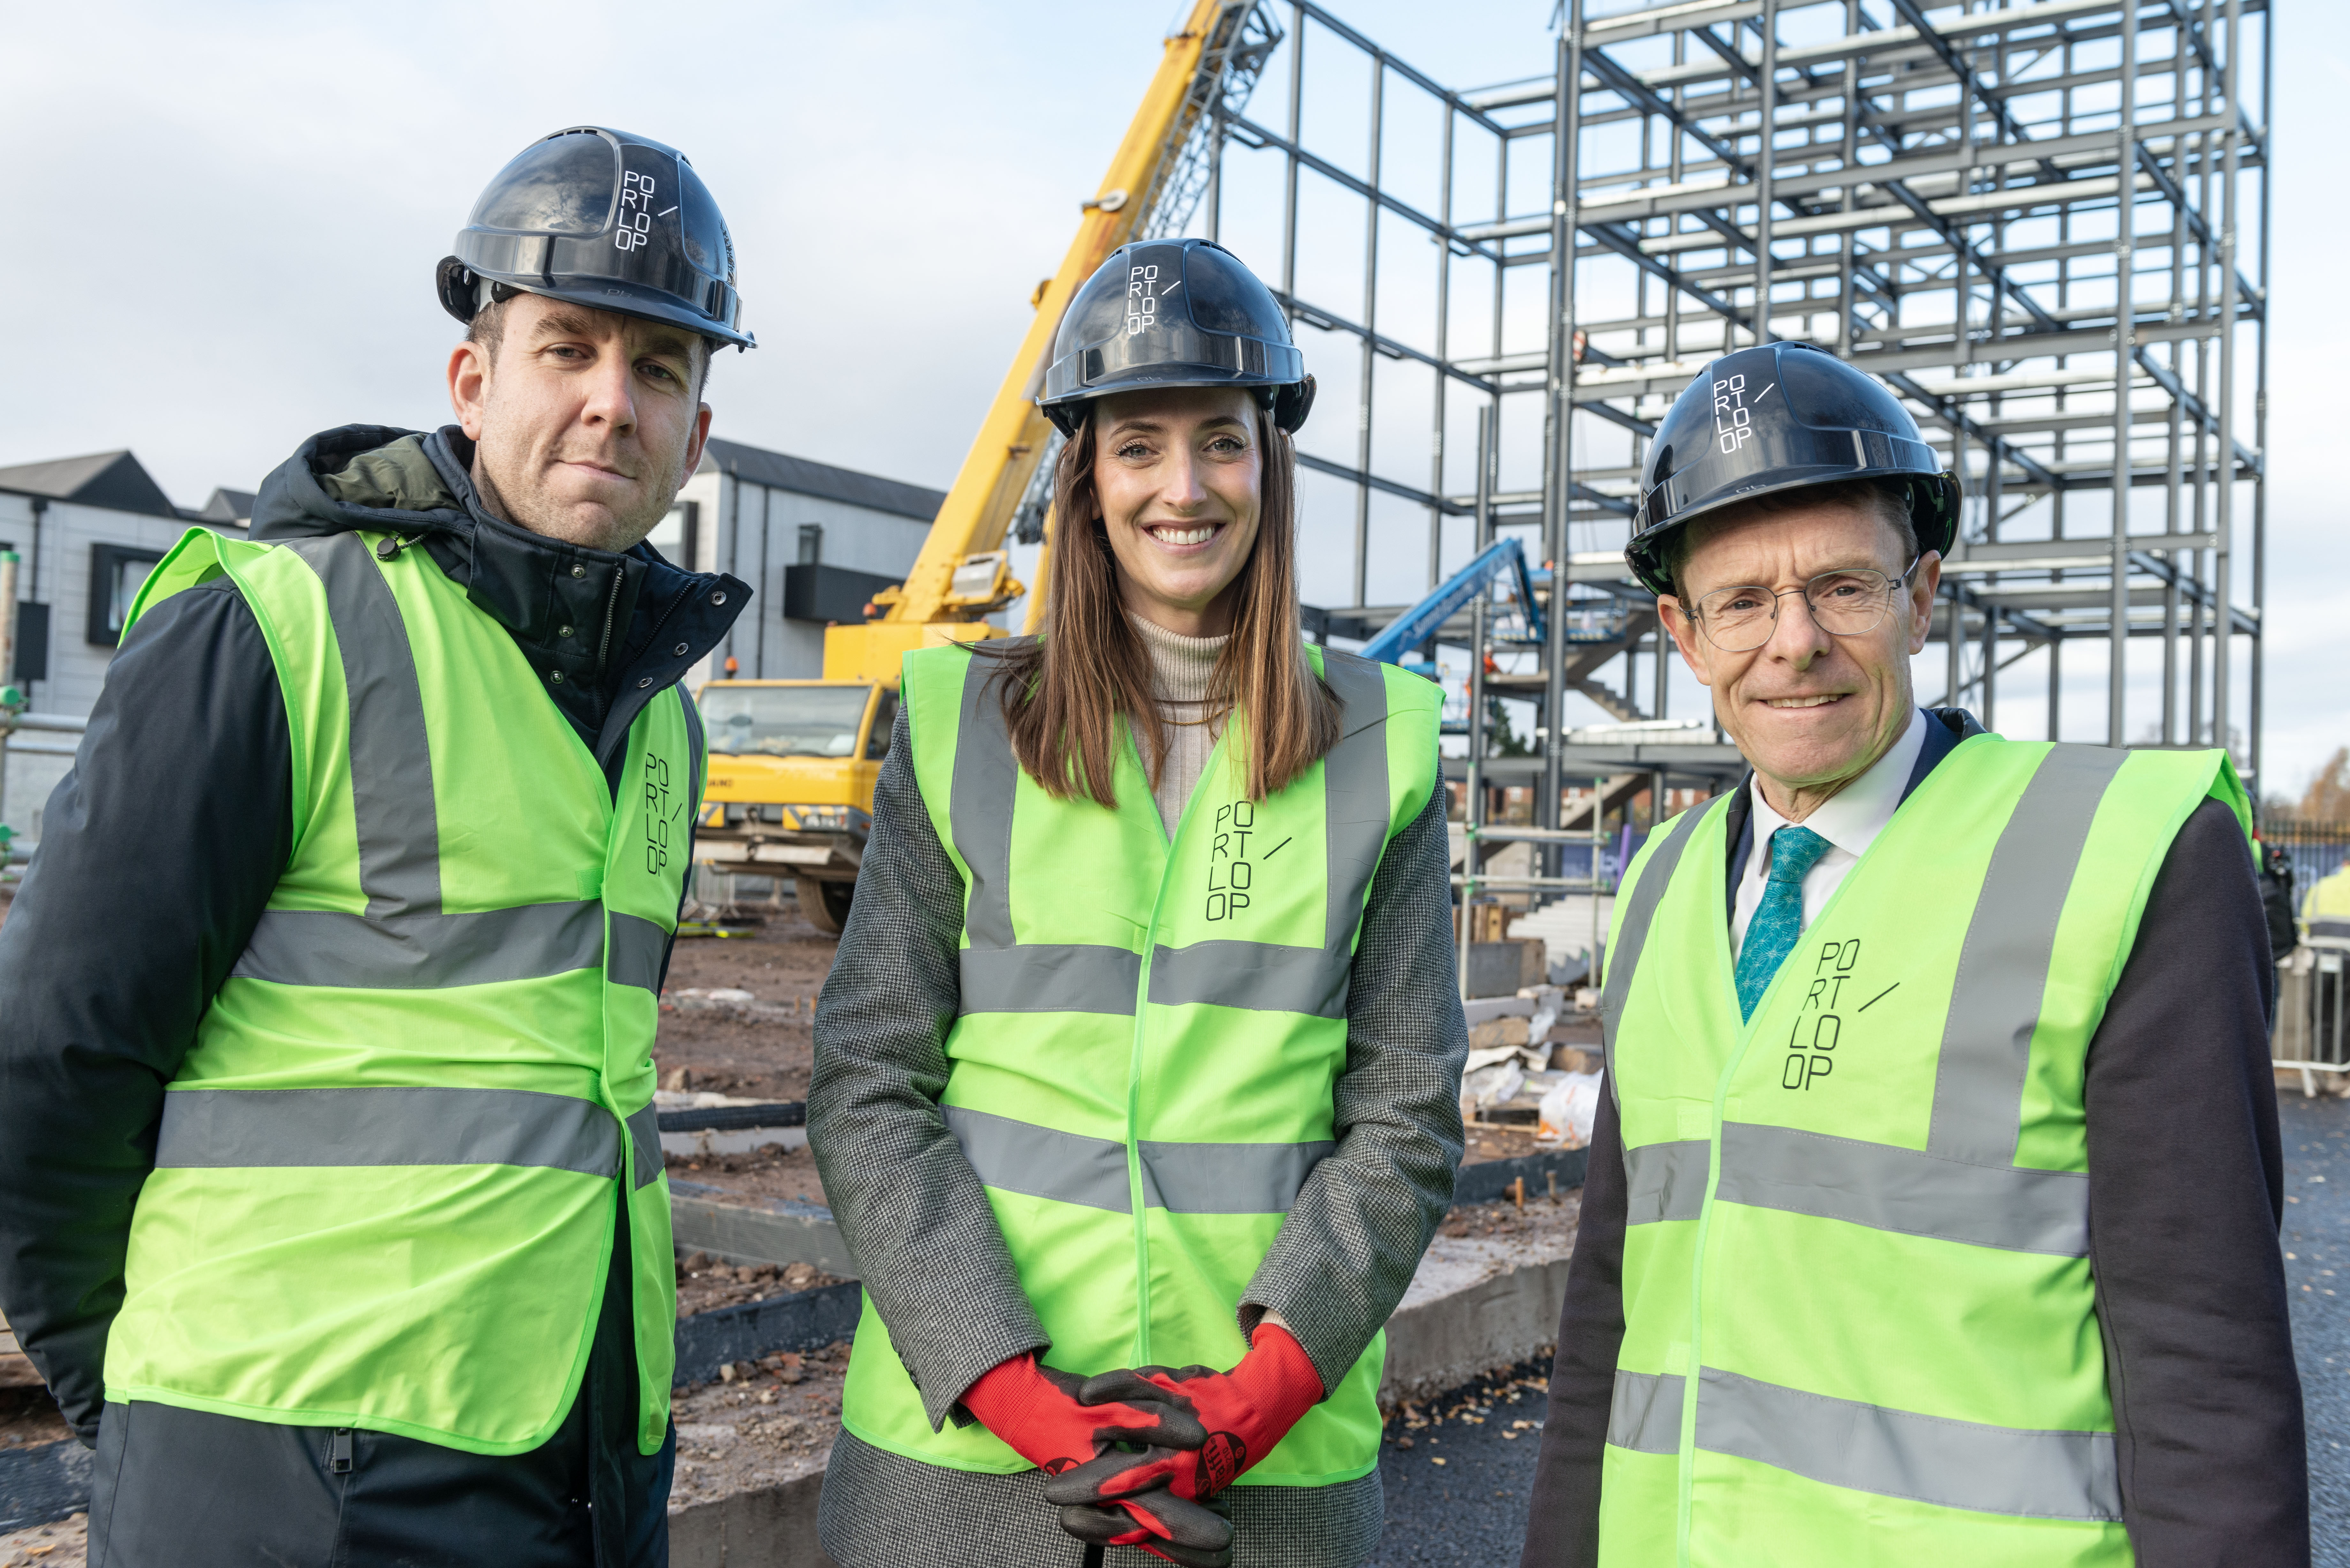 Adam Willets, associate director development at Urban Splash; Sammie Steel, Places for People’s managing director of placemaking and regeneration; and Andy Street, mayor of the West Midlands and Chair of the West Midlands Combined Authority (WMCA).